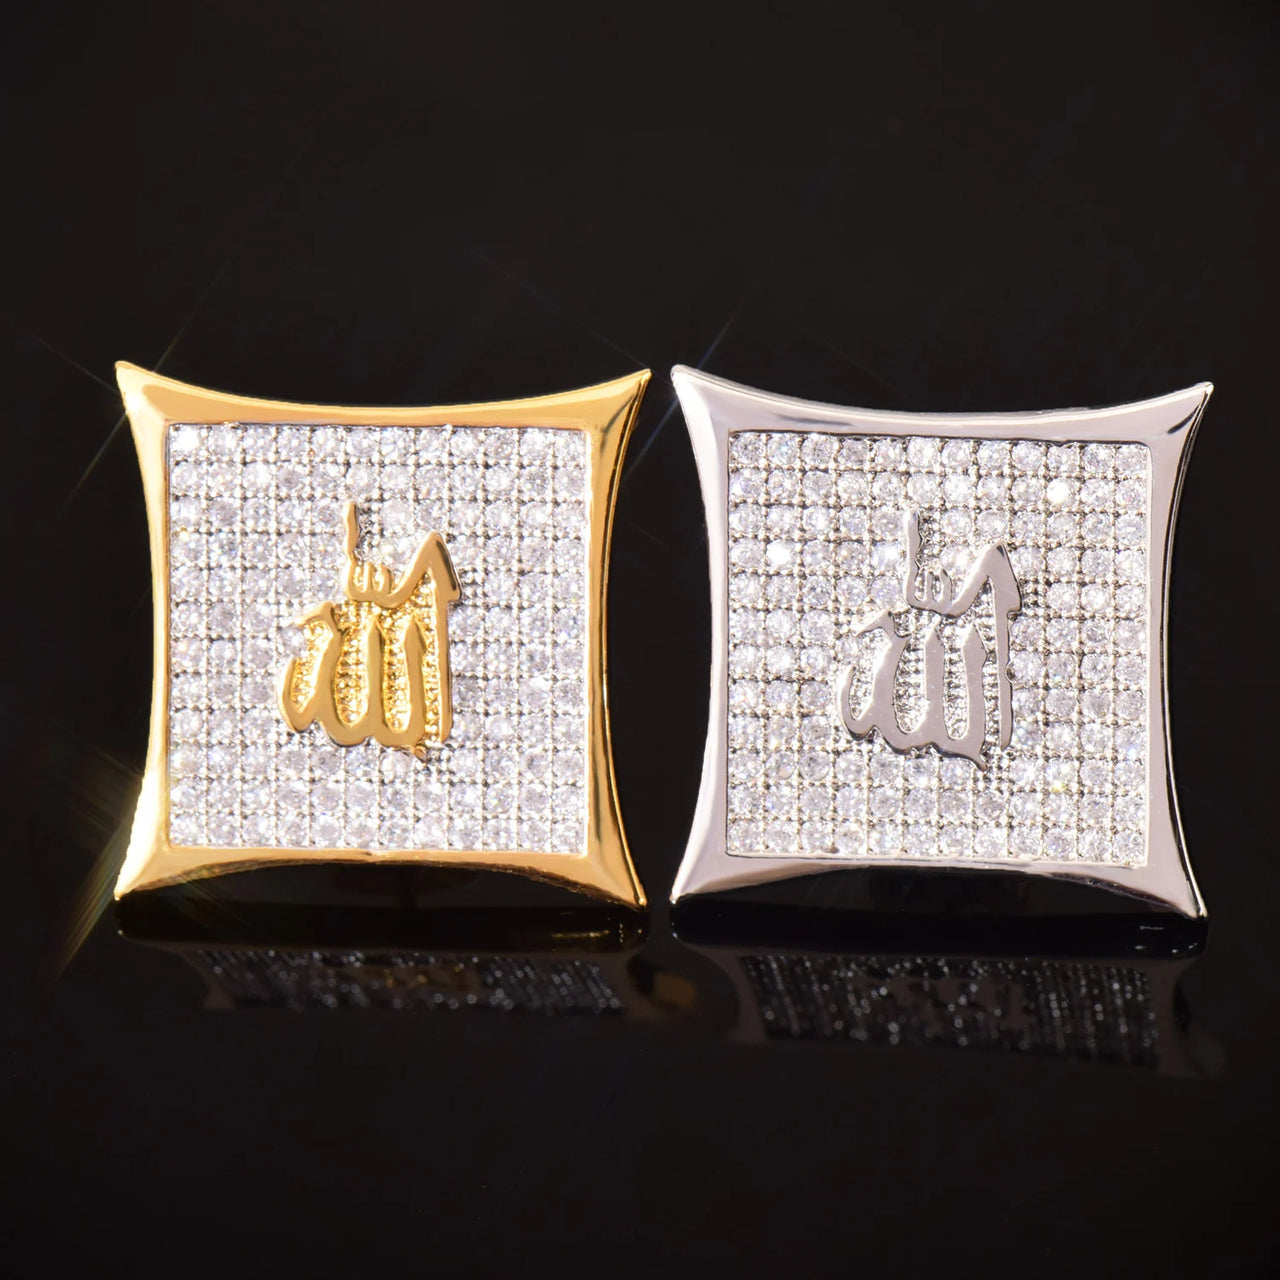 15mm Square Cut Allah Earrings - Different Drips